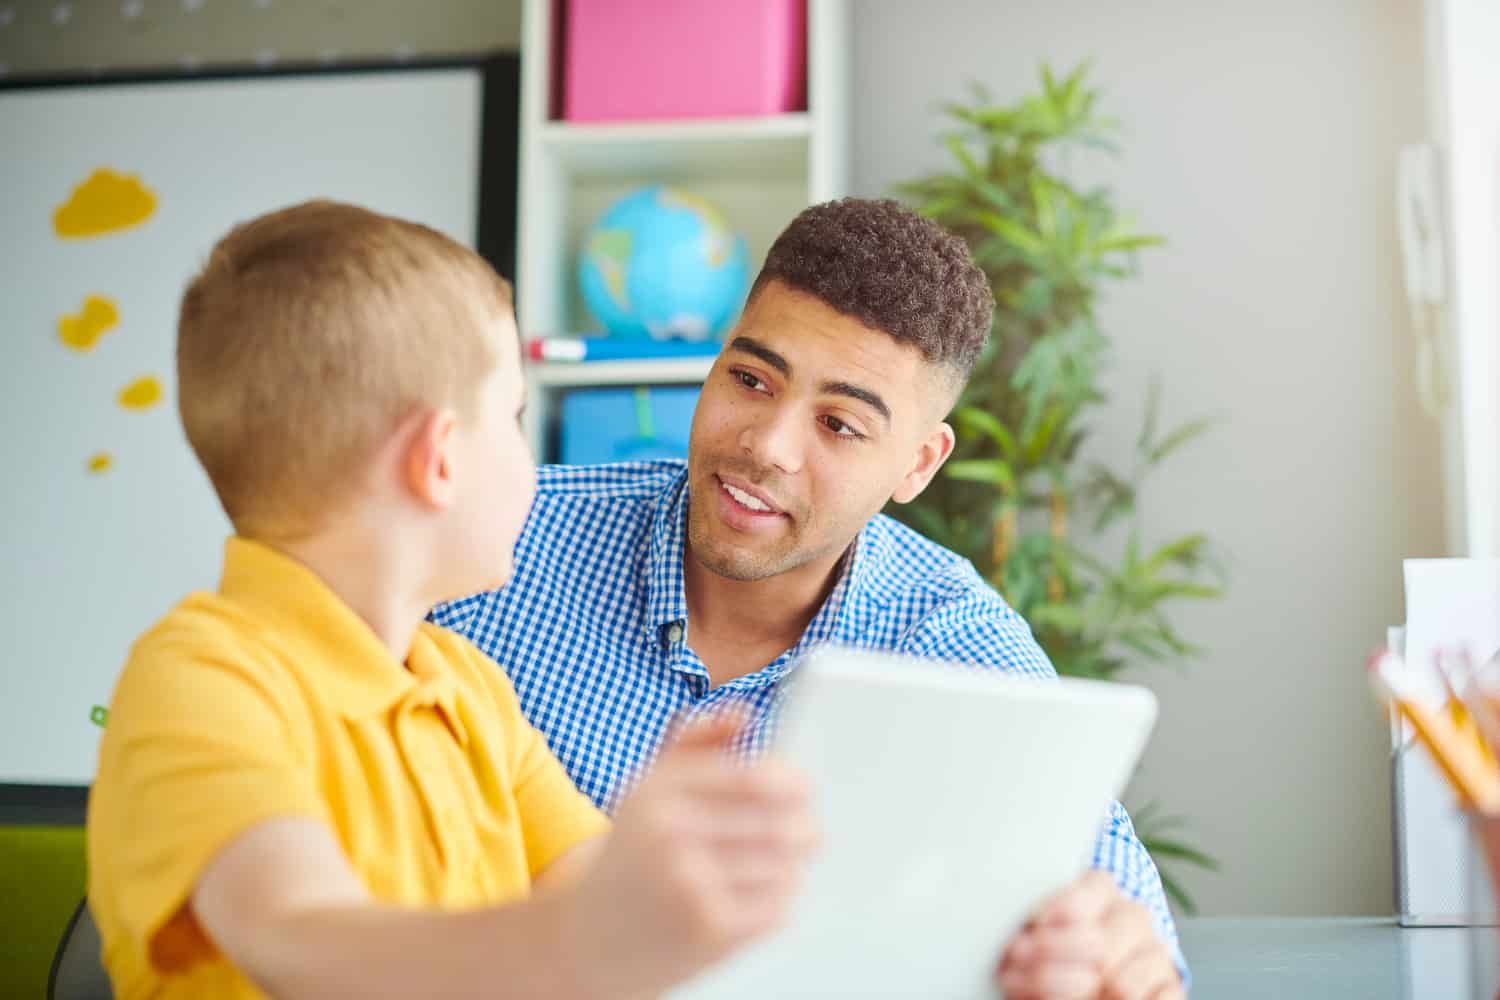 An image showing a Sunday school teacher engaged in a conversation with a young boy, Leo, illustrating the importance of understanding both verbal and non-verbal cues in children